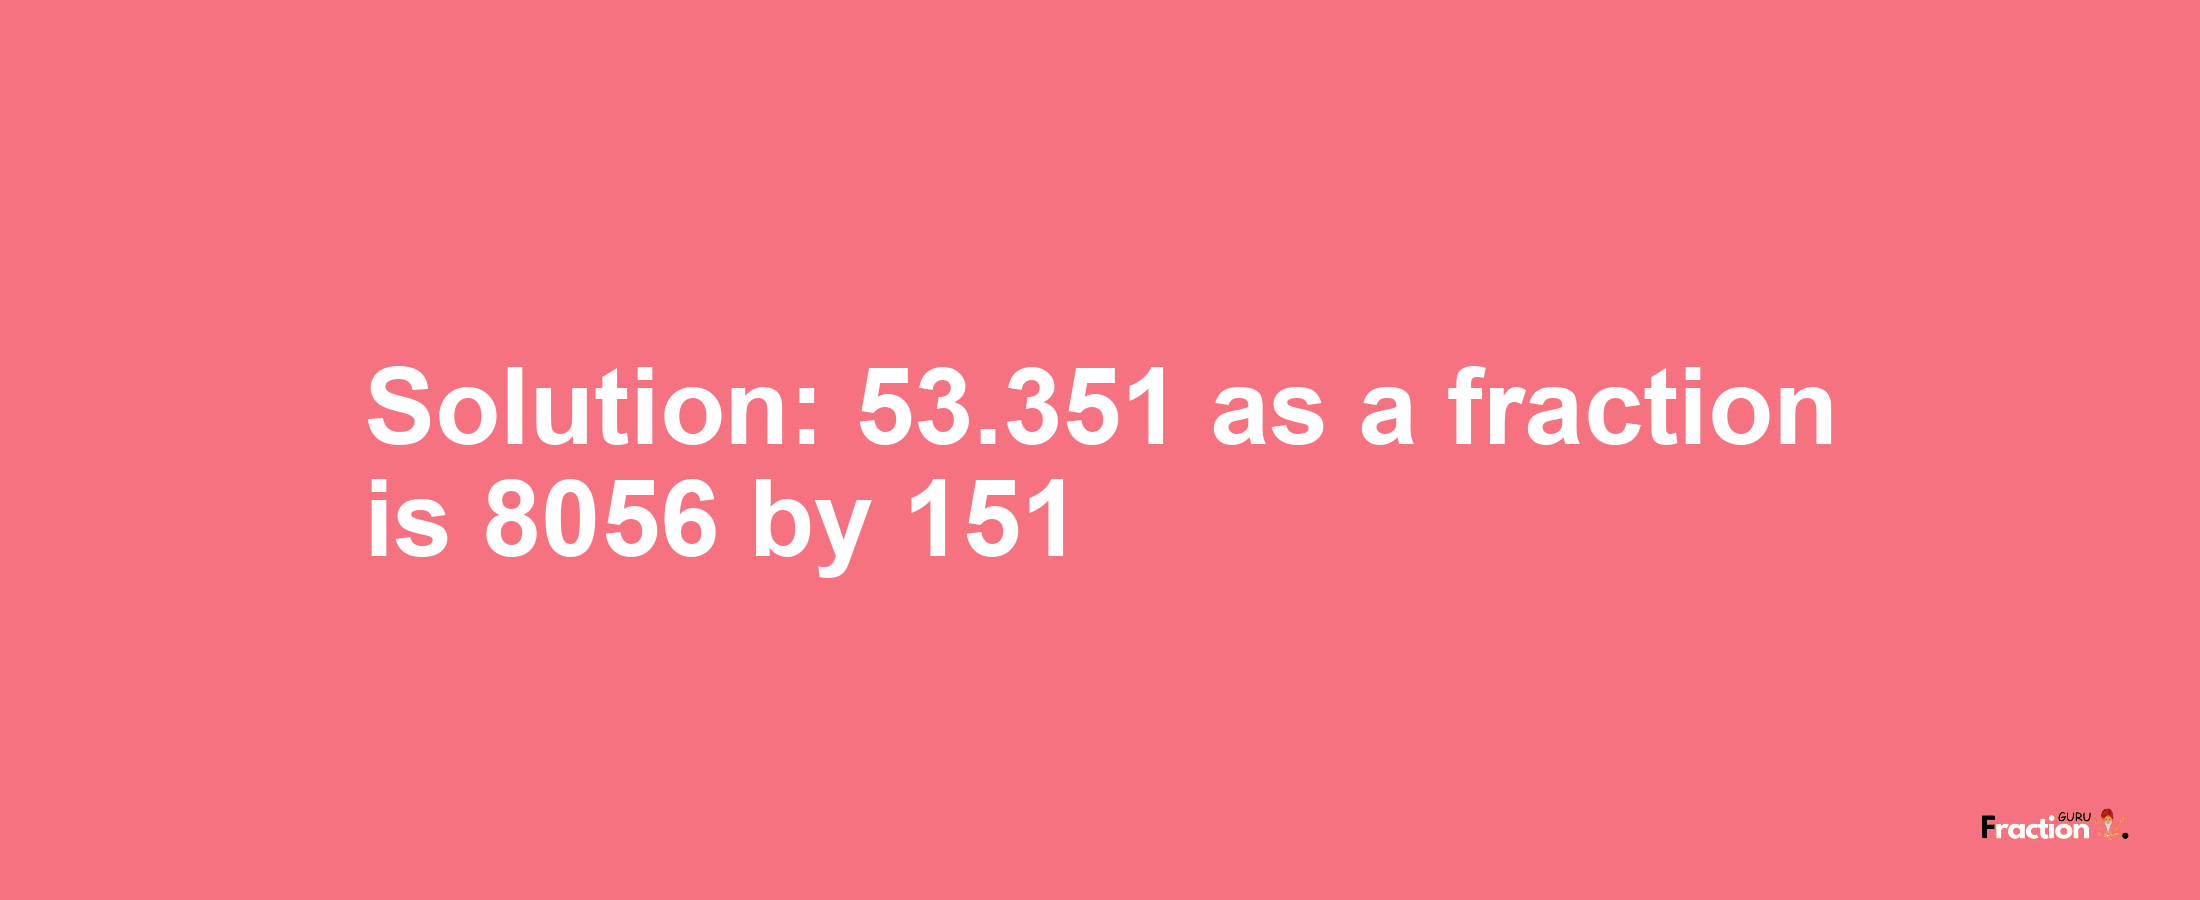 Solution:53.351 as a fraction is 8056/151